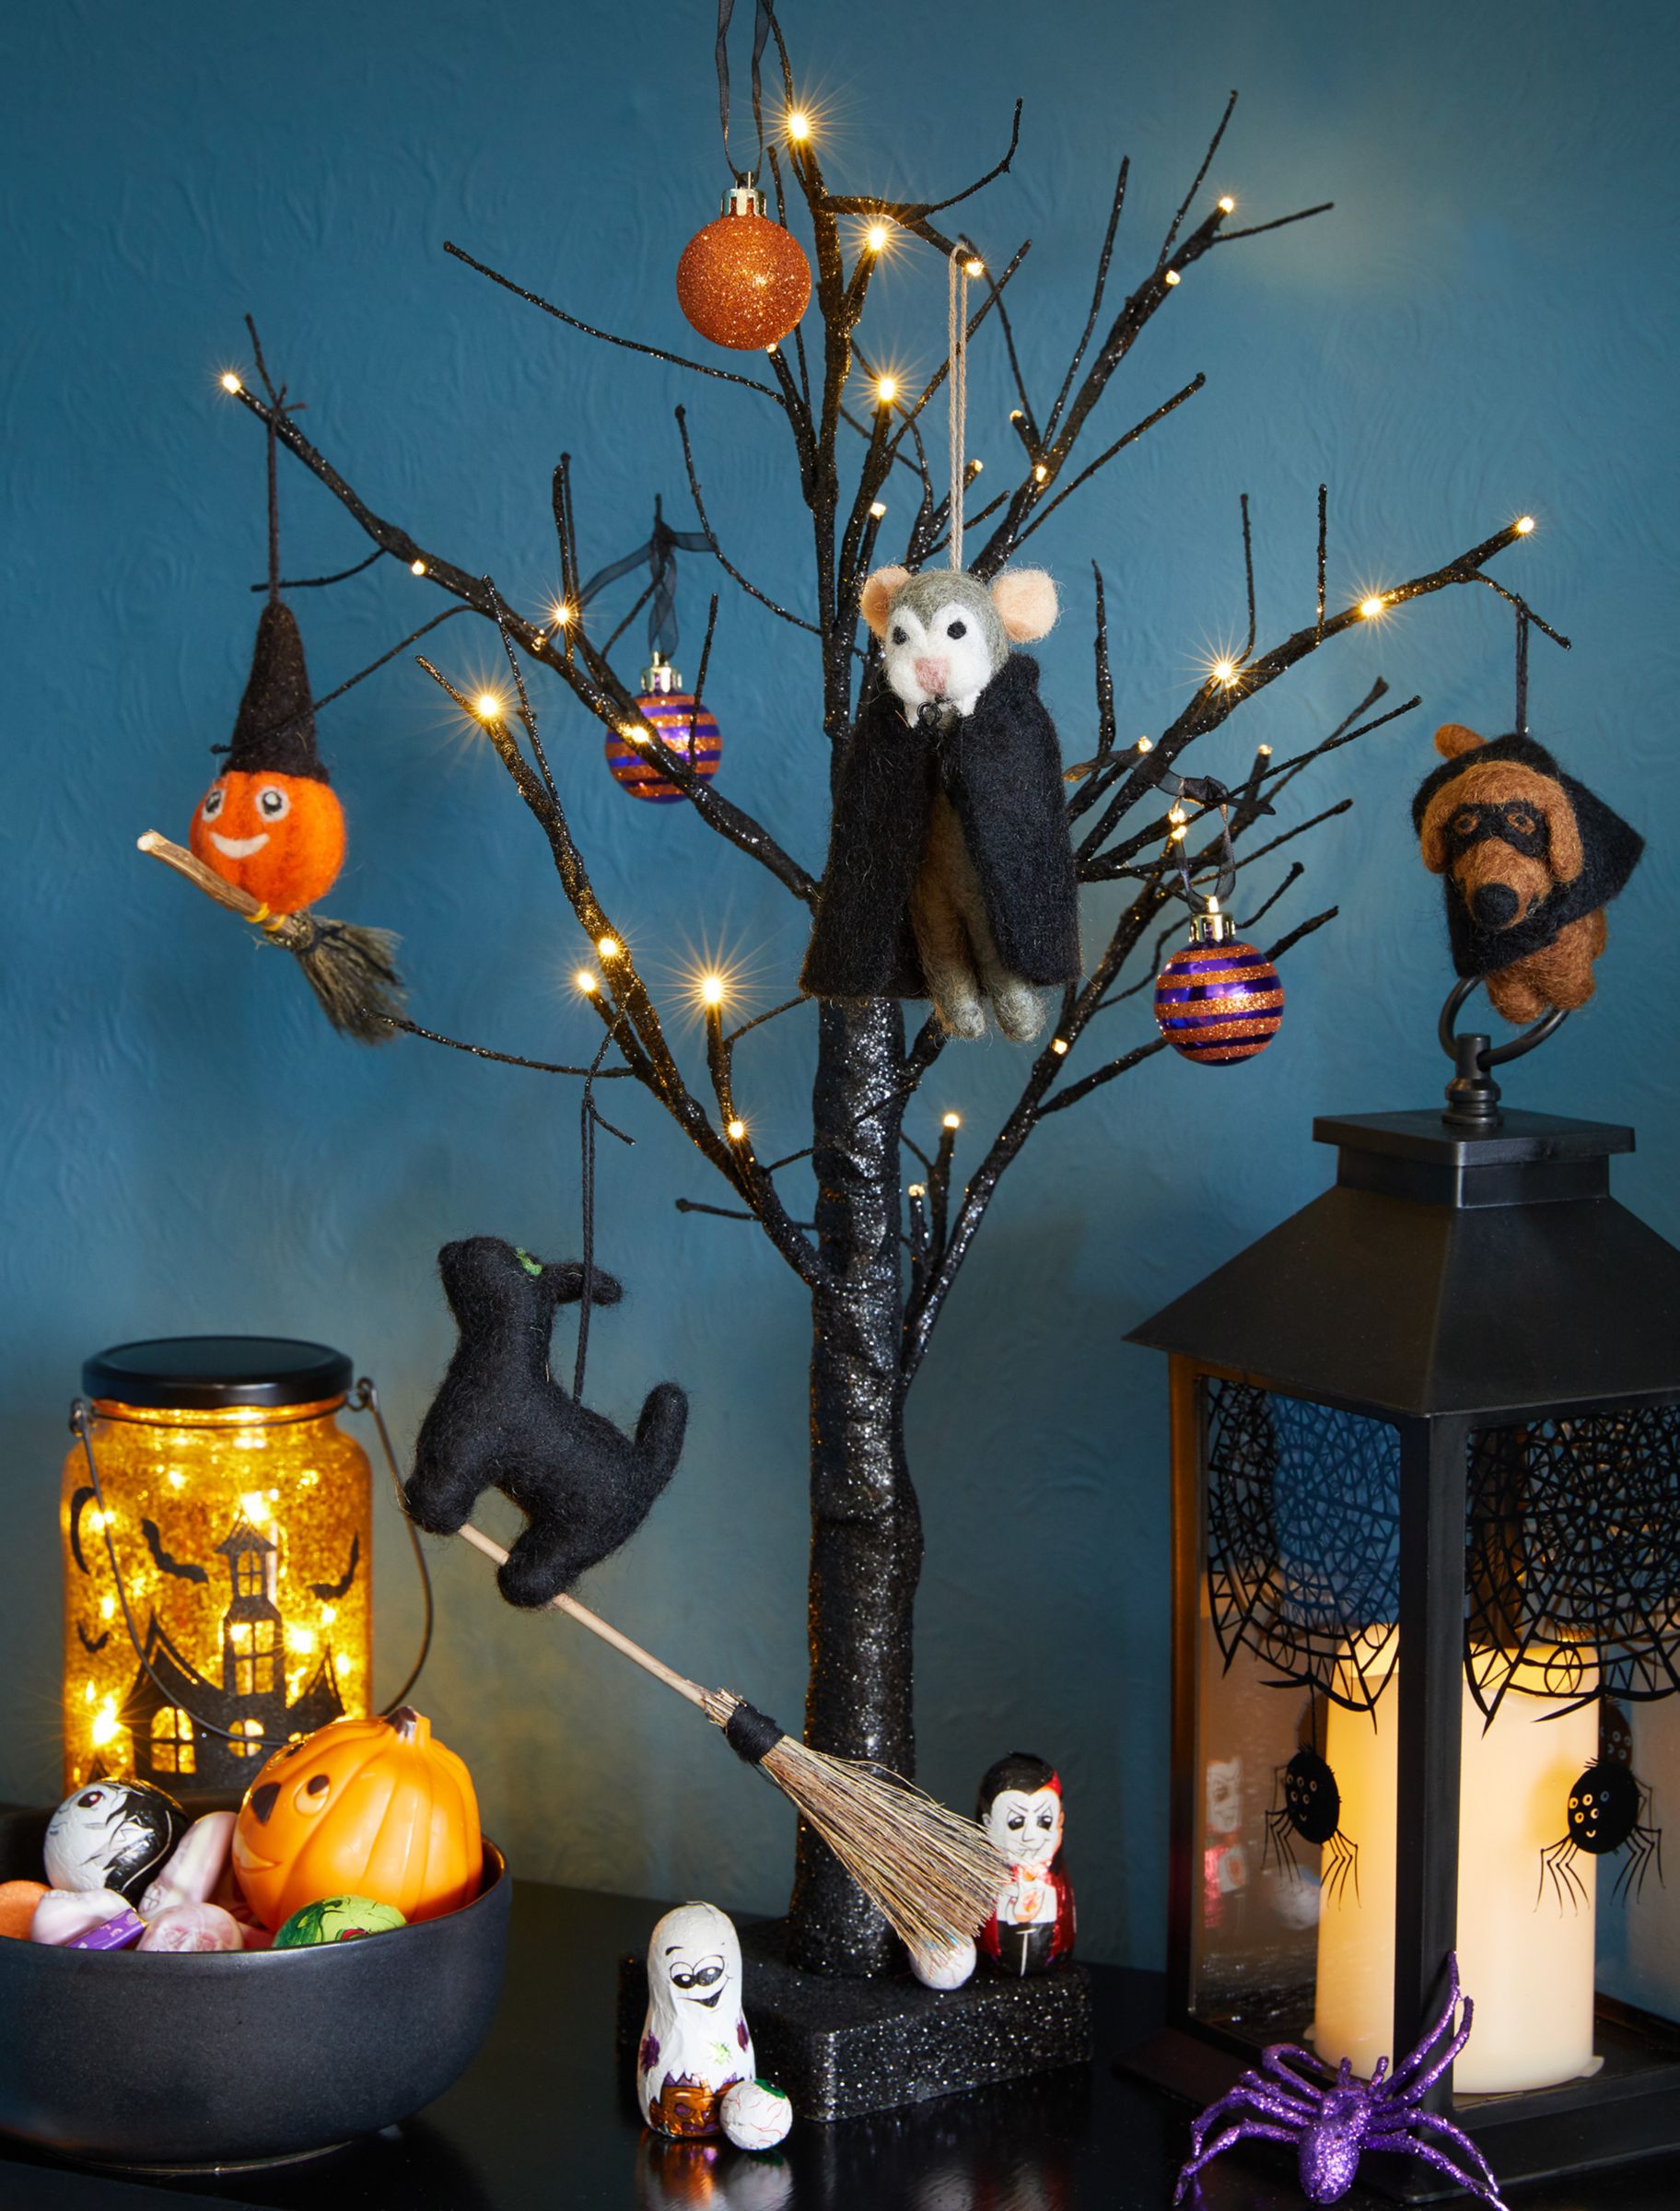 Halloween party ideas for kids | John Lewis & Partners